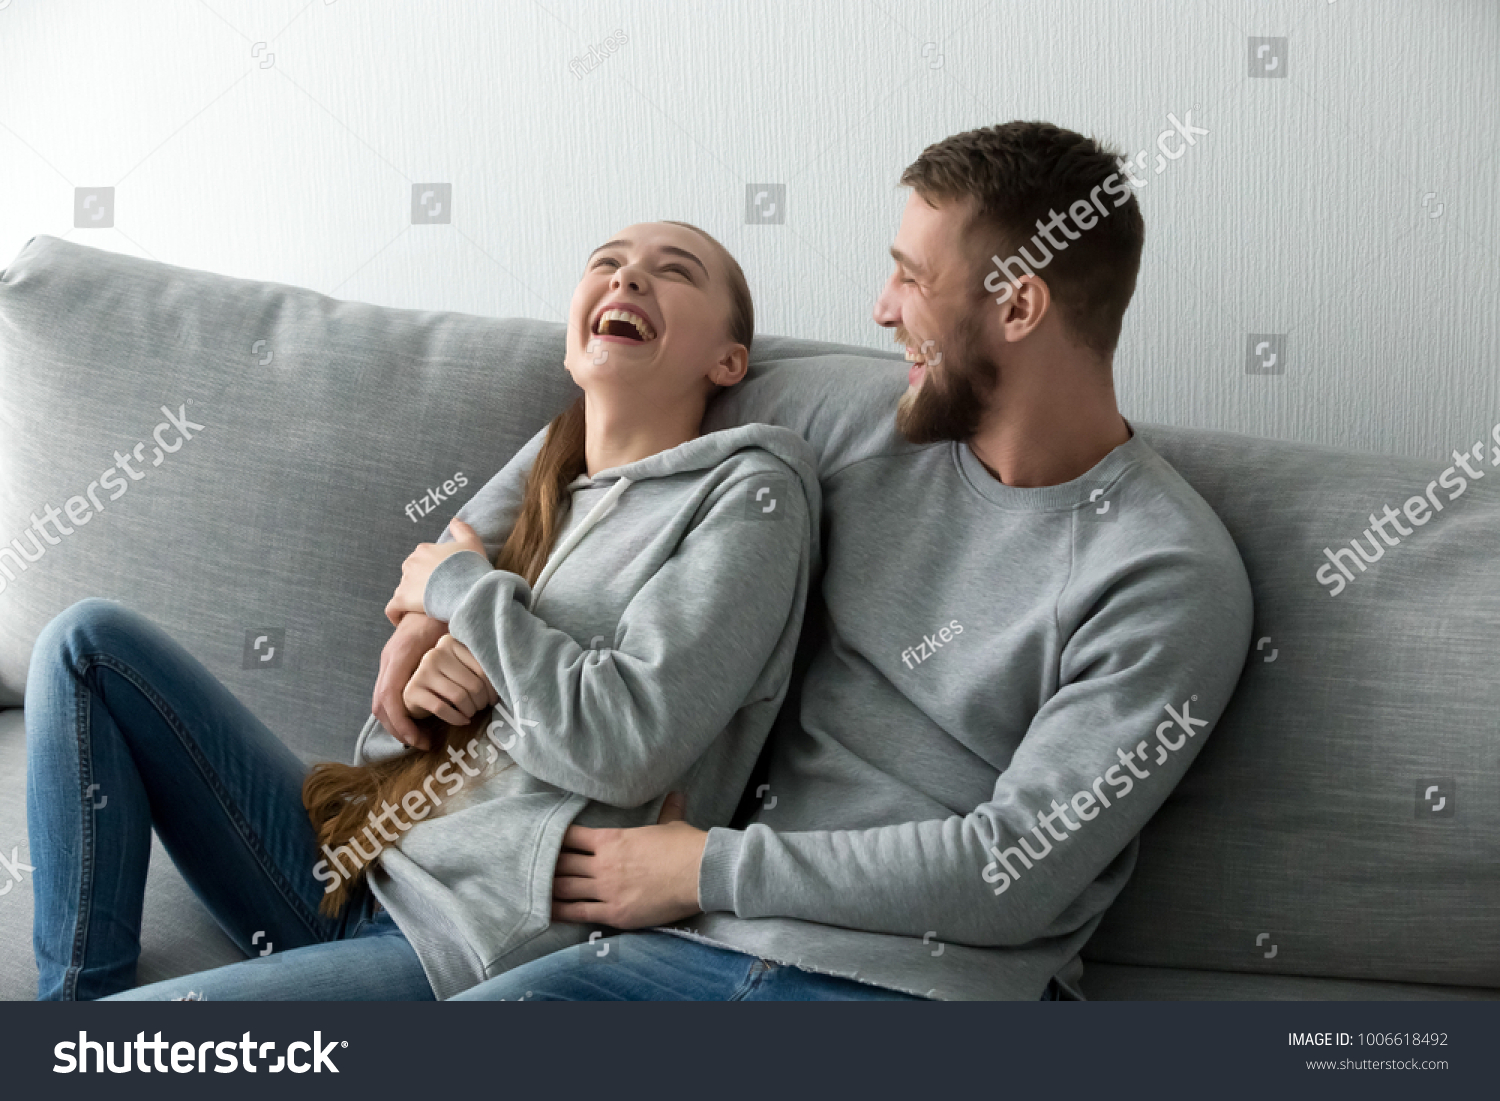 Young happy couple having fun talking laughing relaxing at home on couch, boyfriend embracing girlfriend telling funny joke sitting on sofa, humor in relationships, enjoying weekend together #1006618492